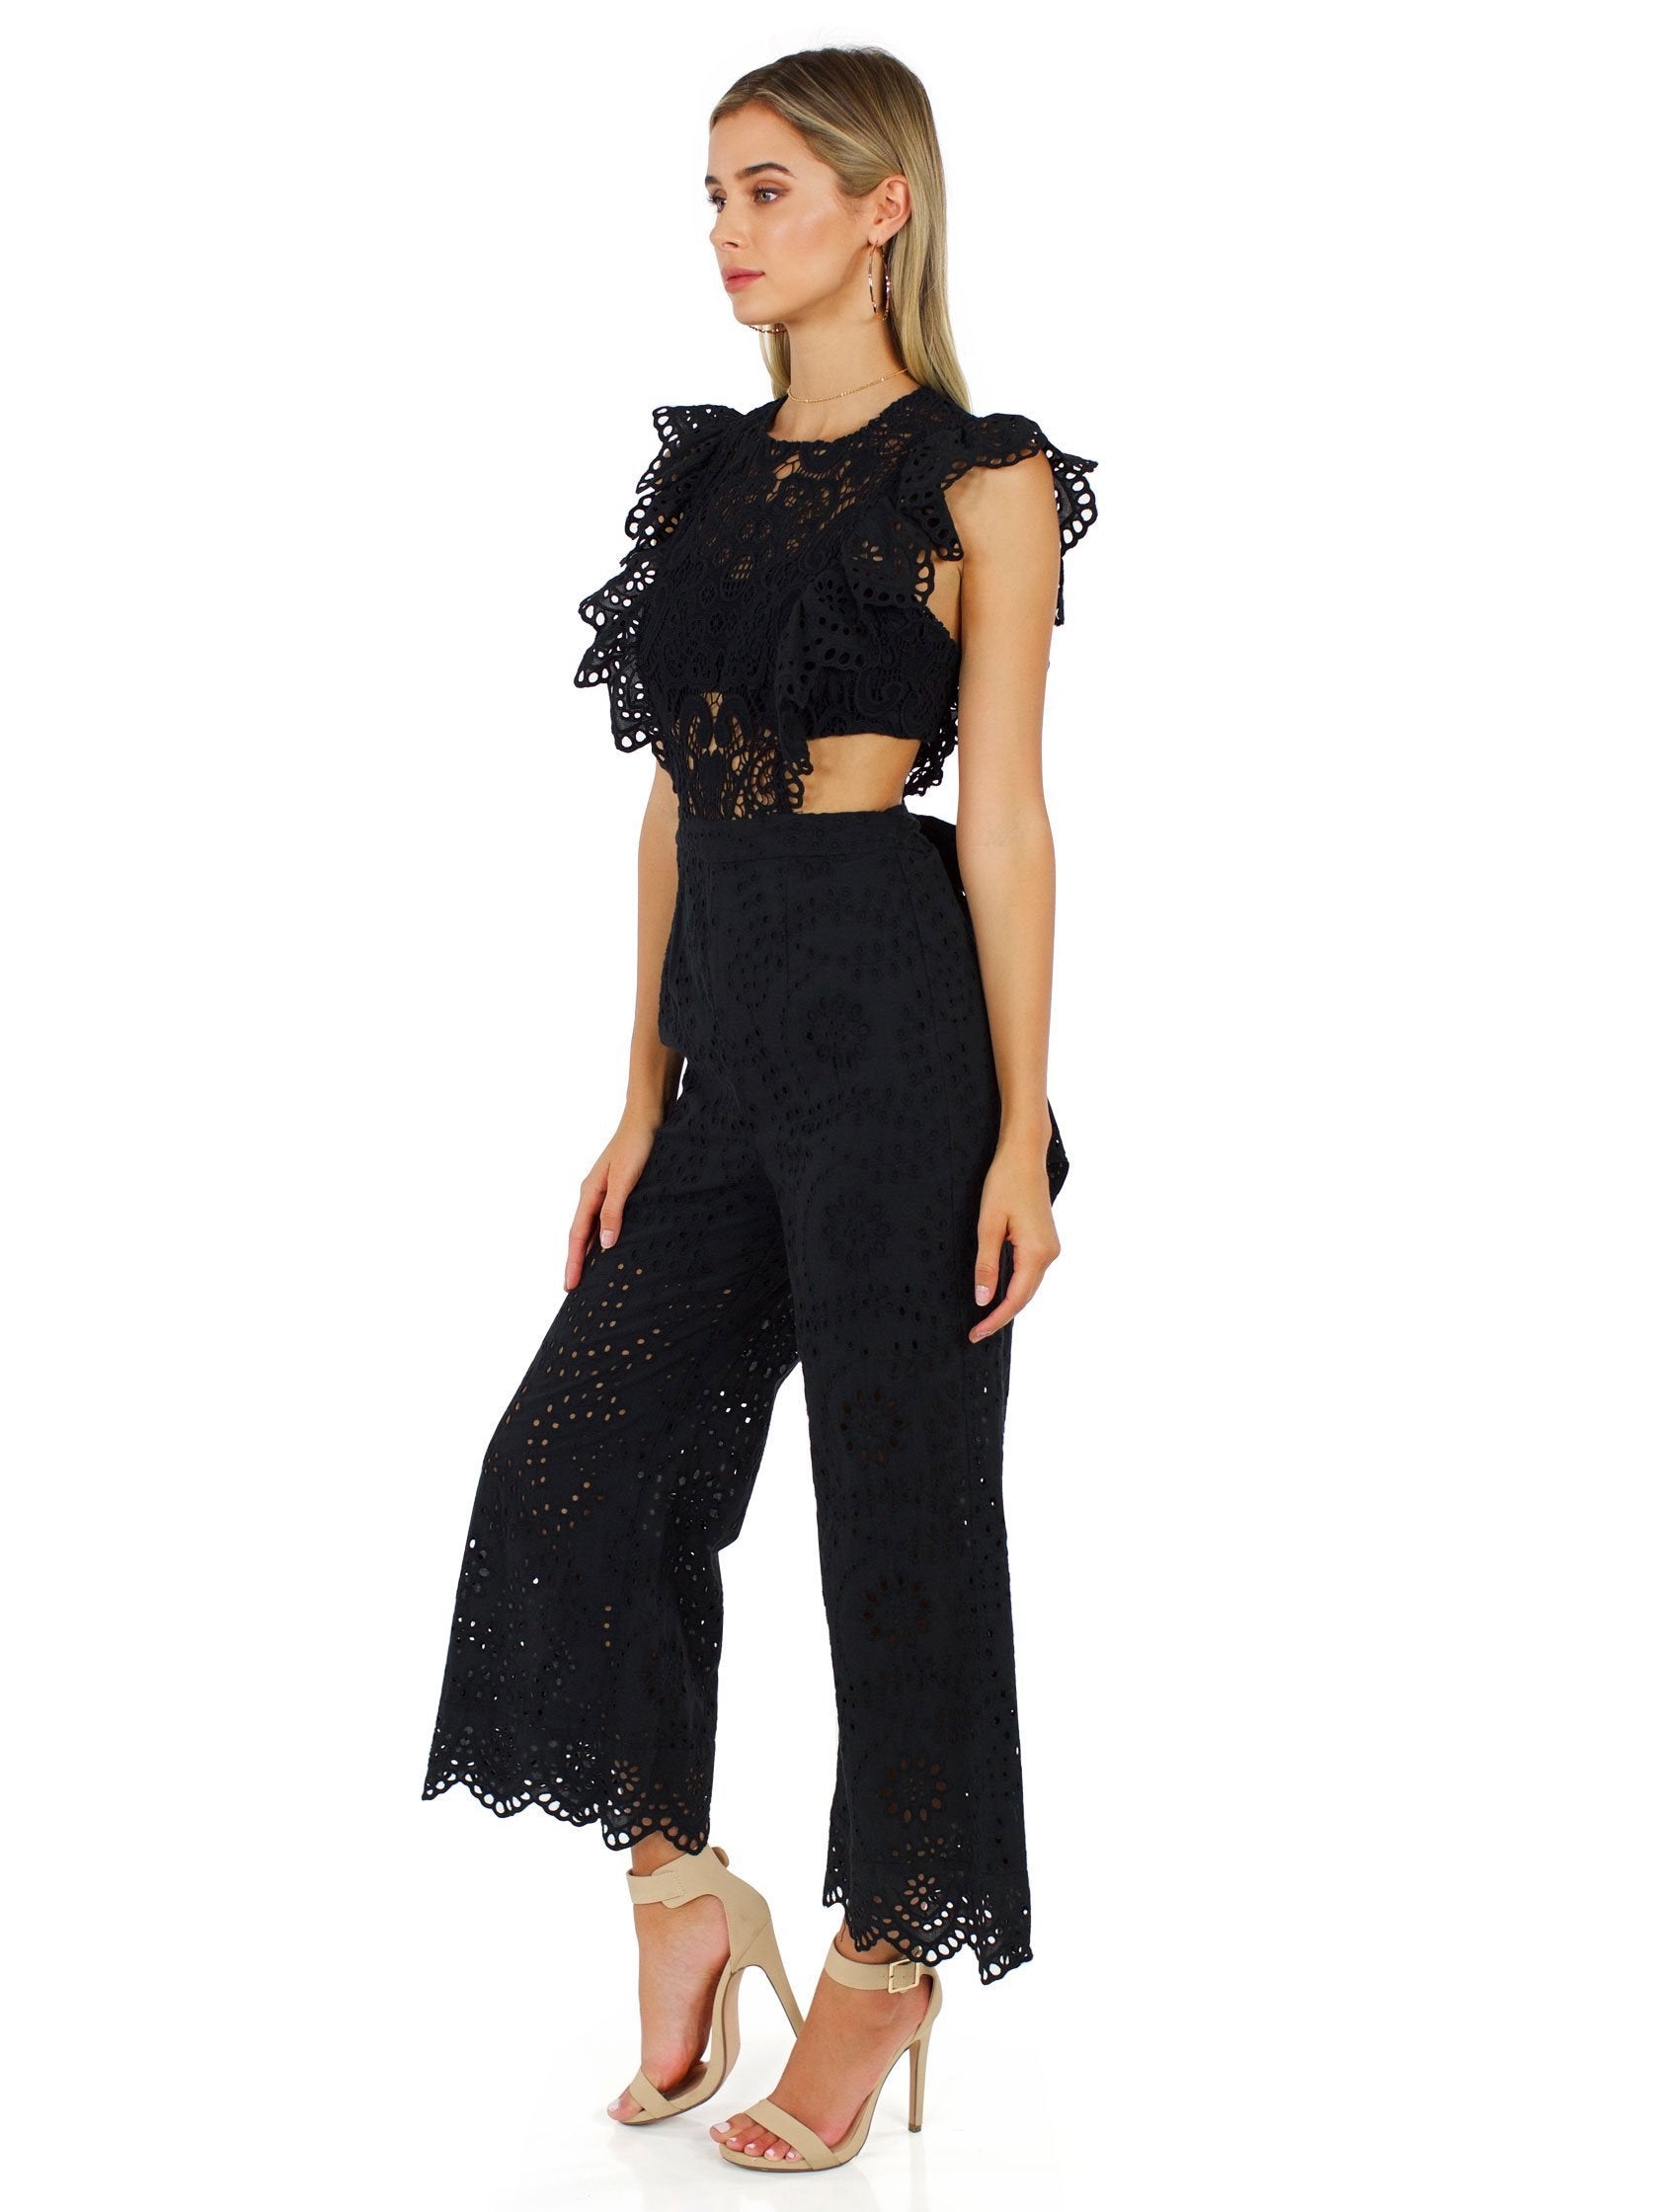 Woman wearing a jumpsuit rental from Nightcap Clothing called Eyelet Apron Jumpsuit